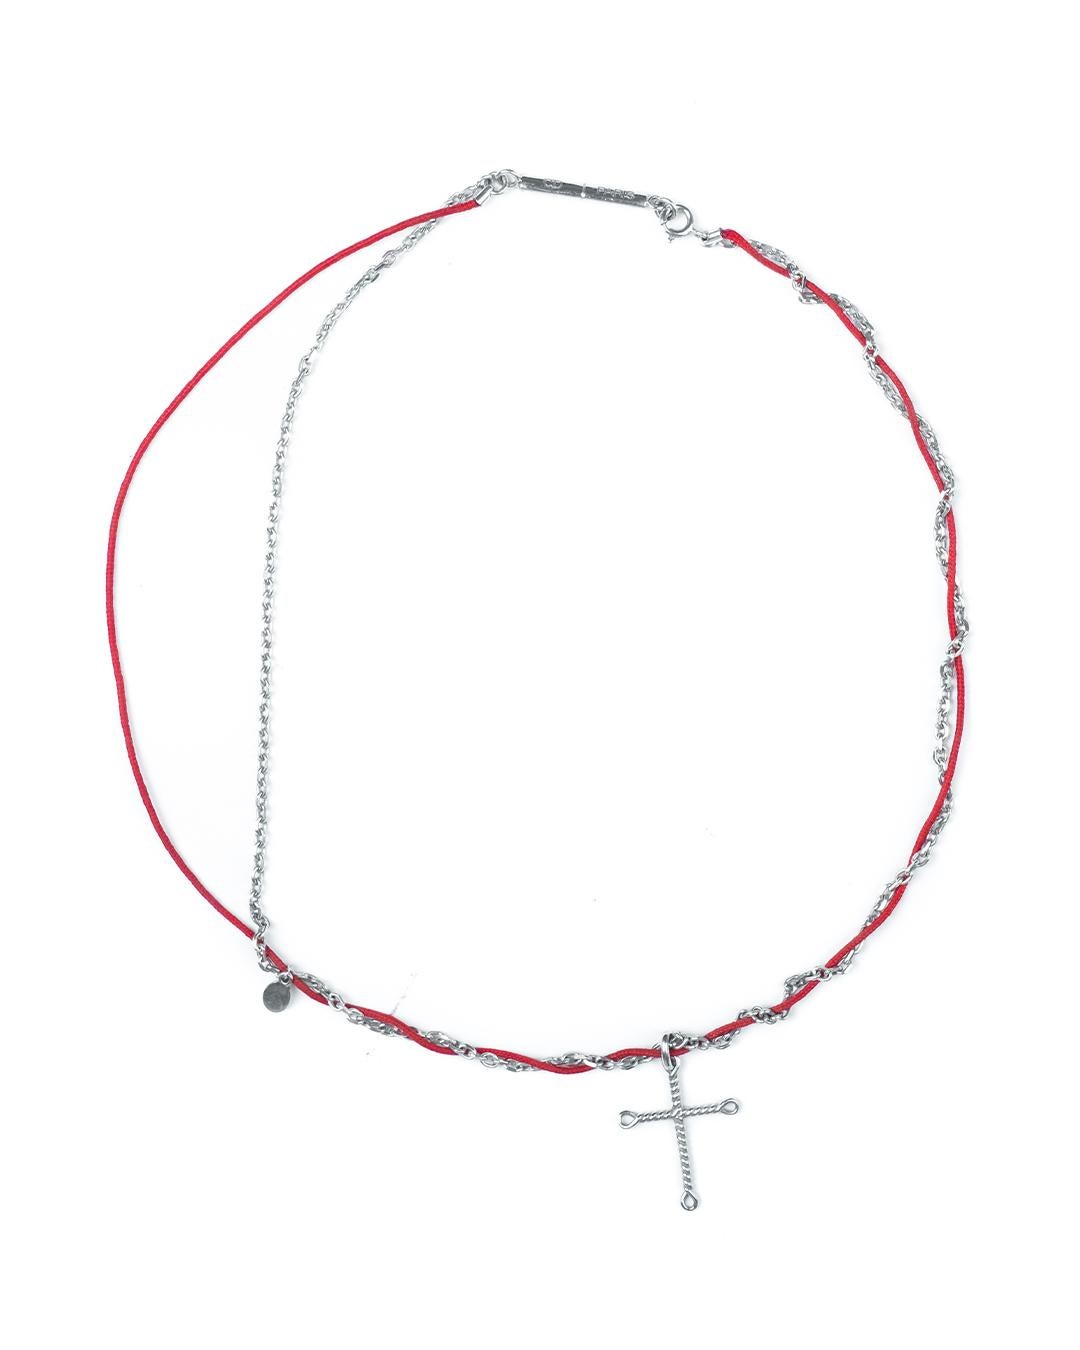 Men's Dior Homme AW2005 .925 Wrapped Cross Necklace